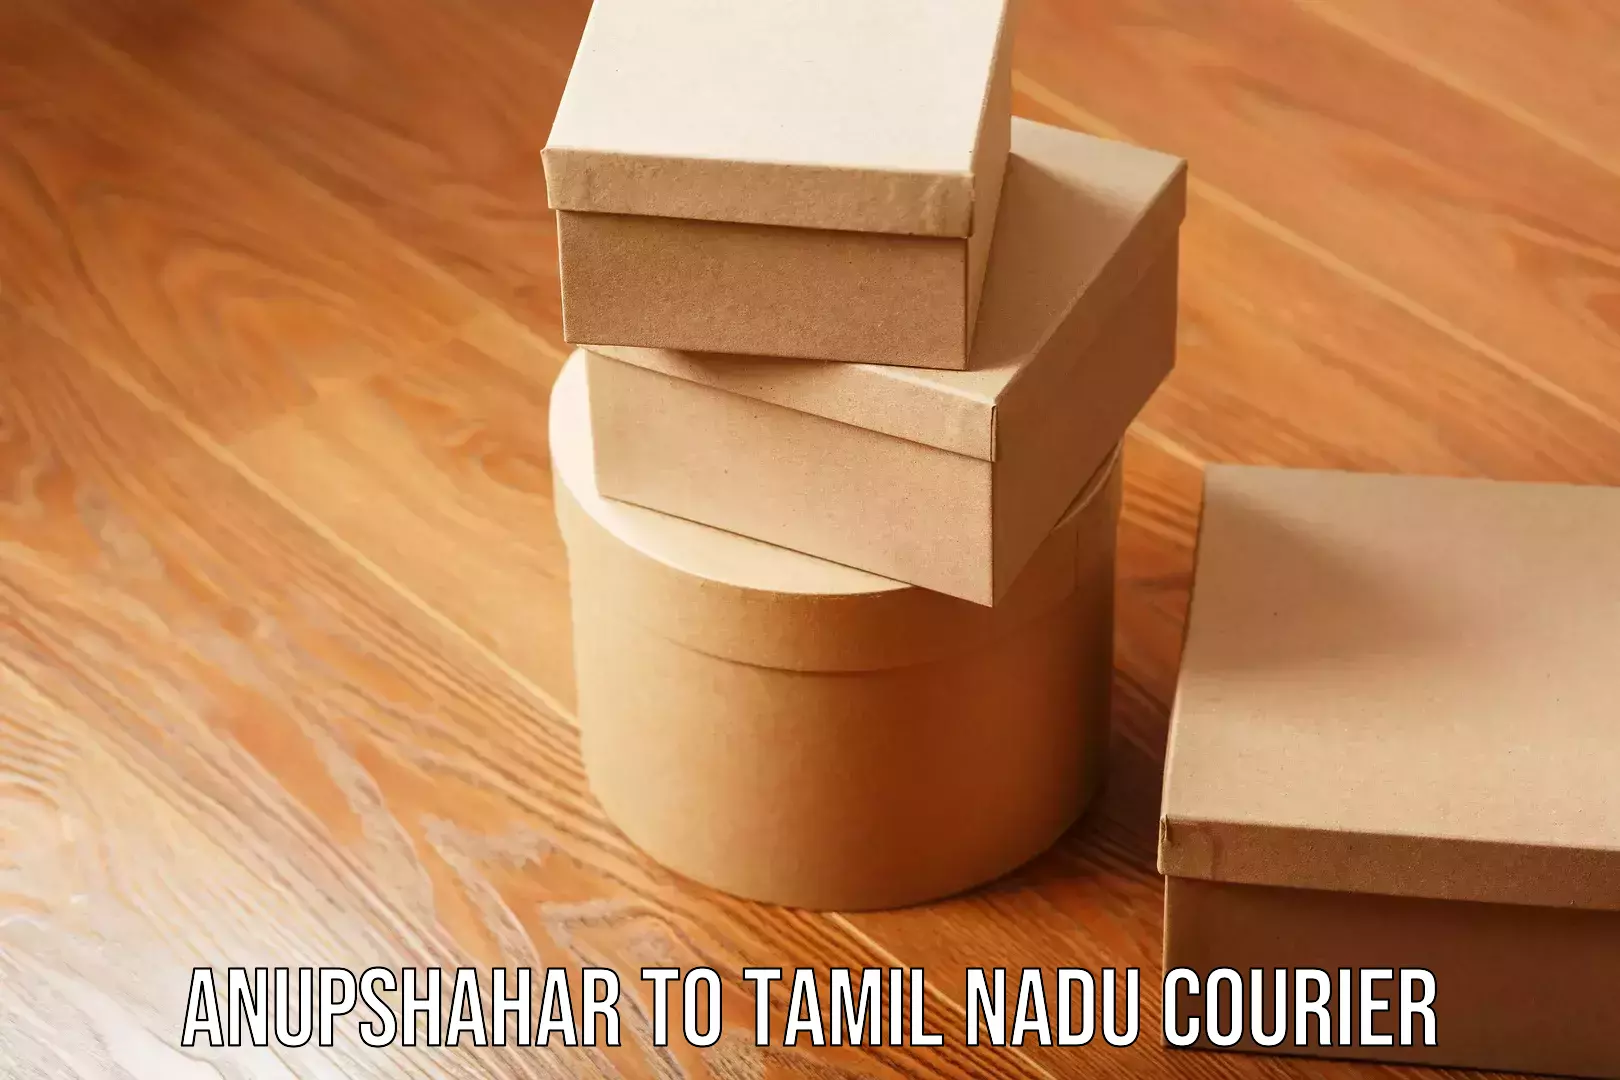 Efficient courier operations Anupshahar to Tamil Nadu